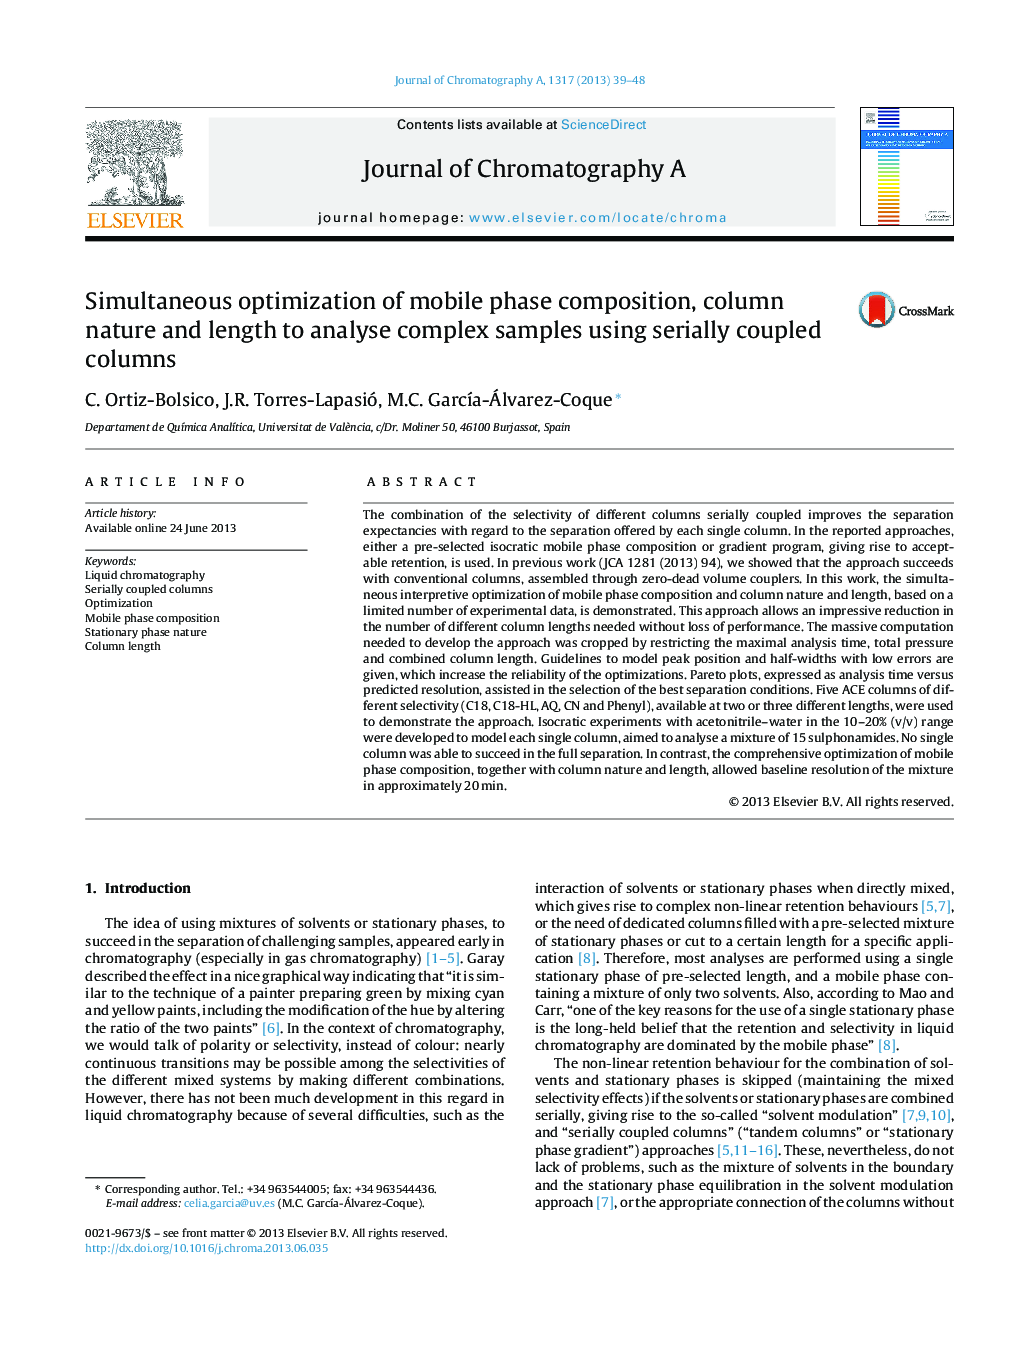 Simultaneous optimization of mobile phase composition, column nature and length to analyse complex samples using serially coupled columns